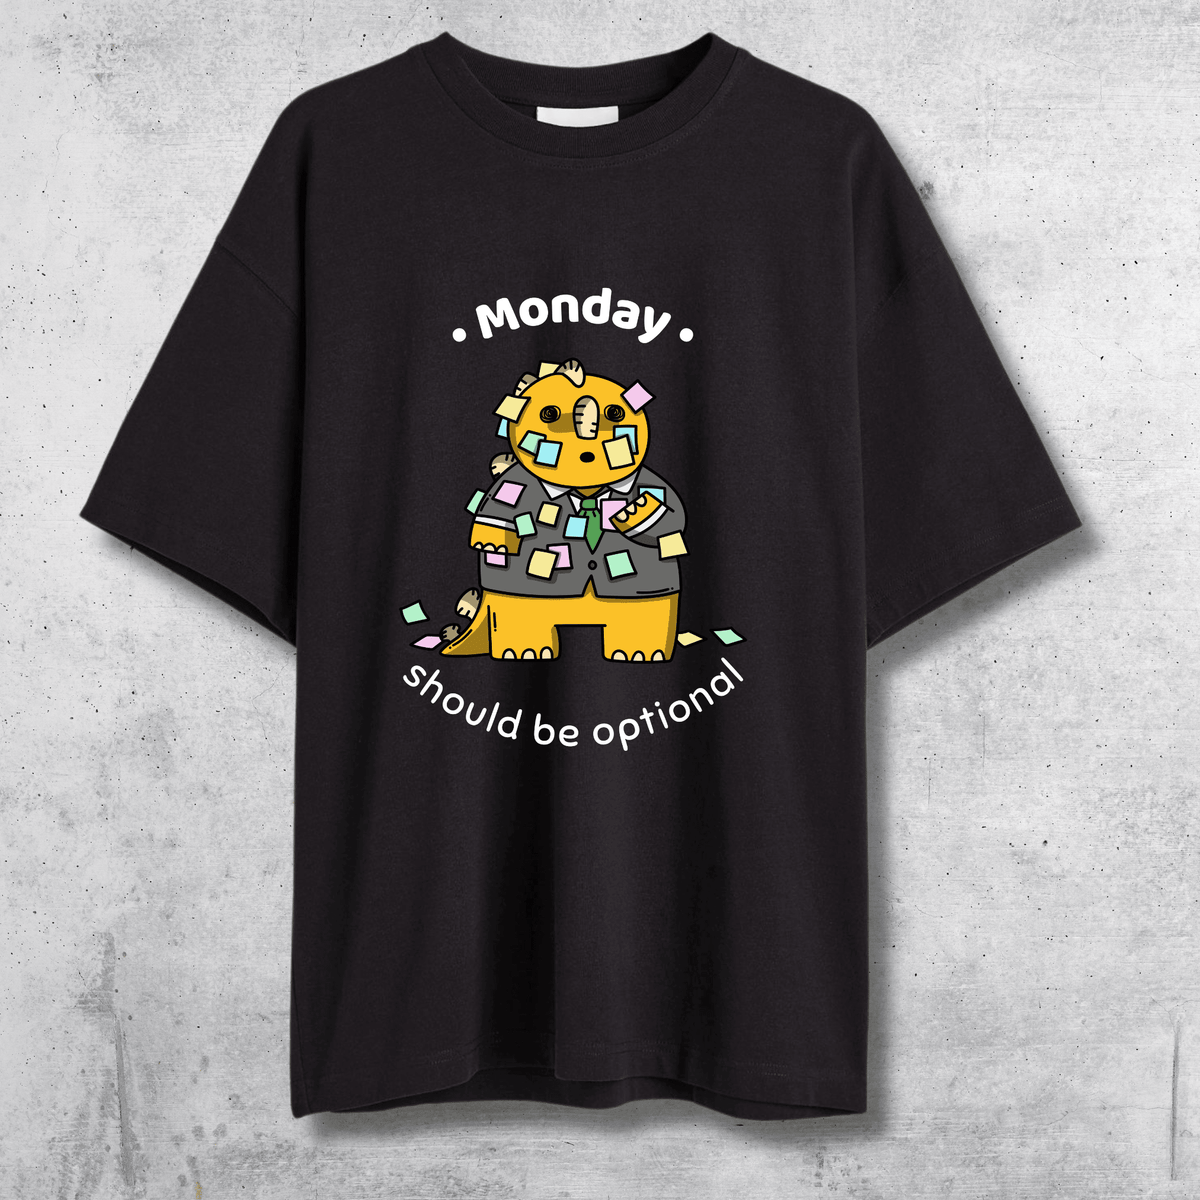 "Monday": Oversized T-shirt | Graphic Tees for men - Graphic Tees for women